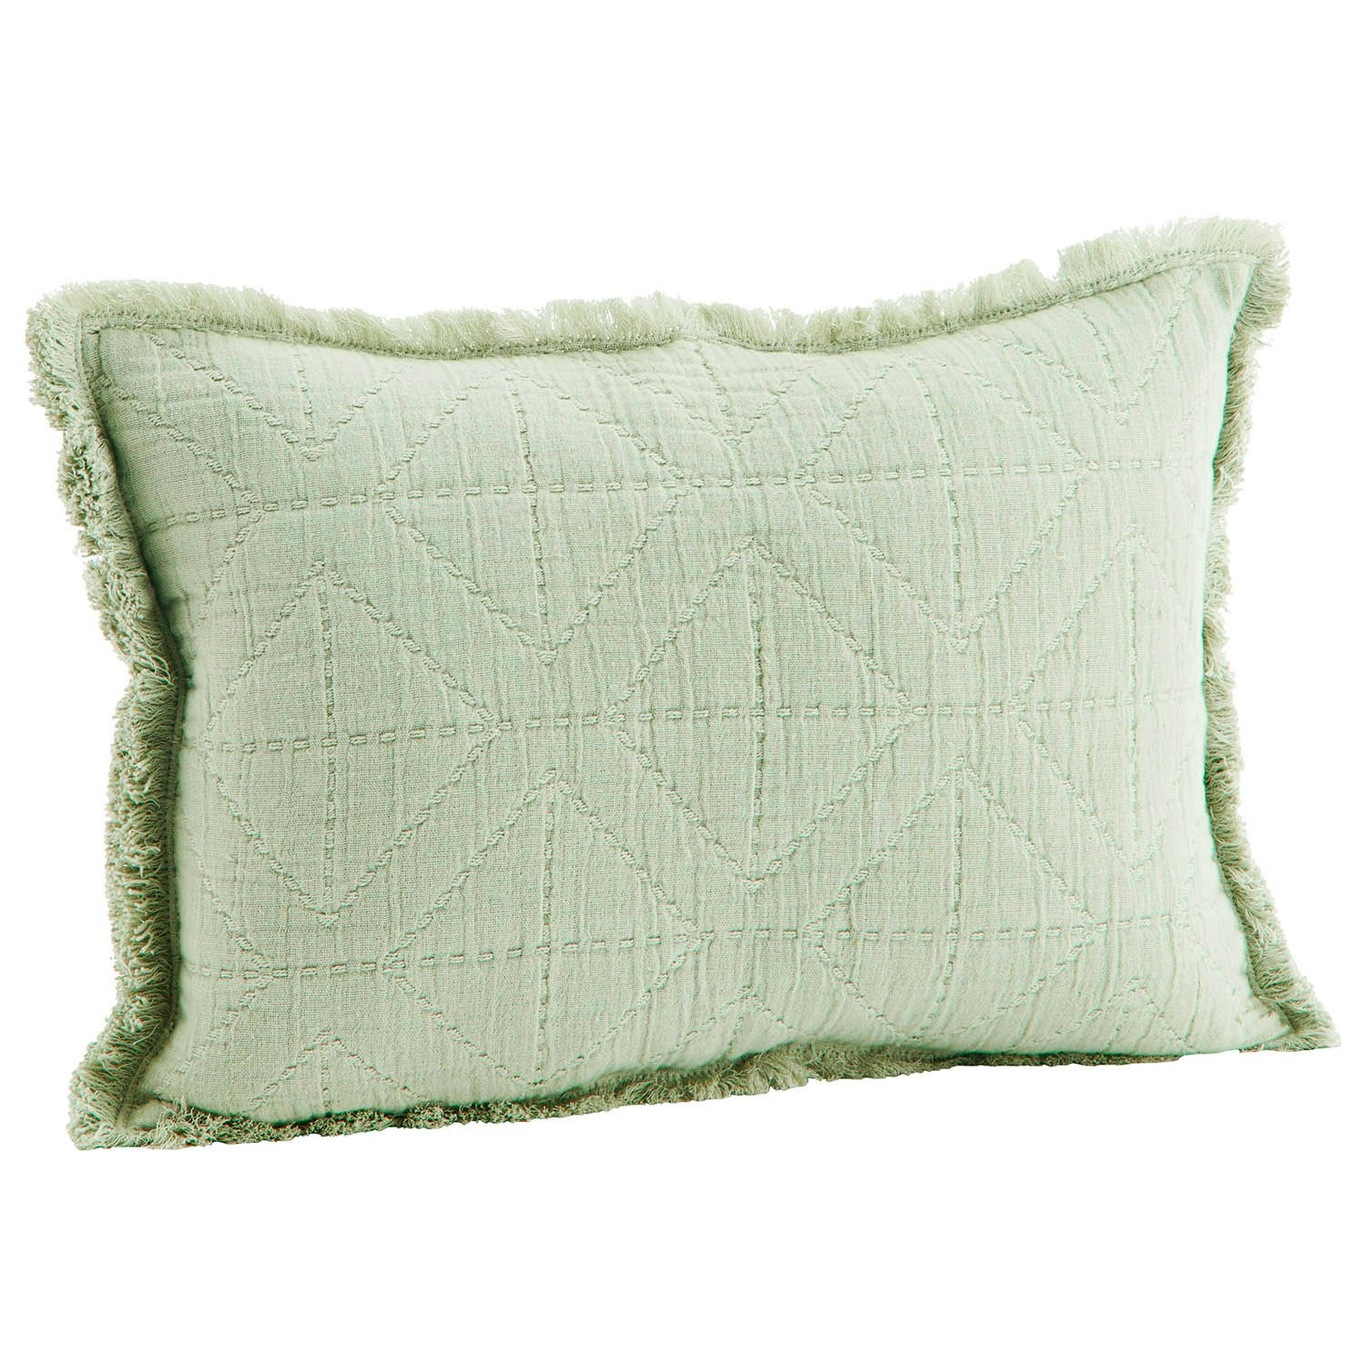 Embroidered Cushion Cover 30x45 cm, Sage